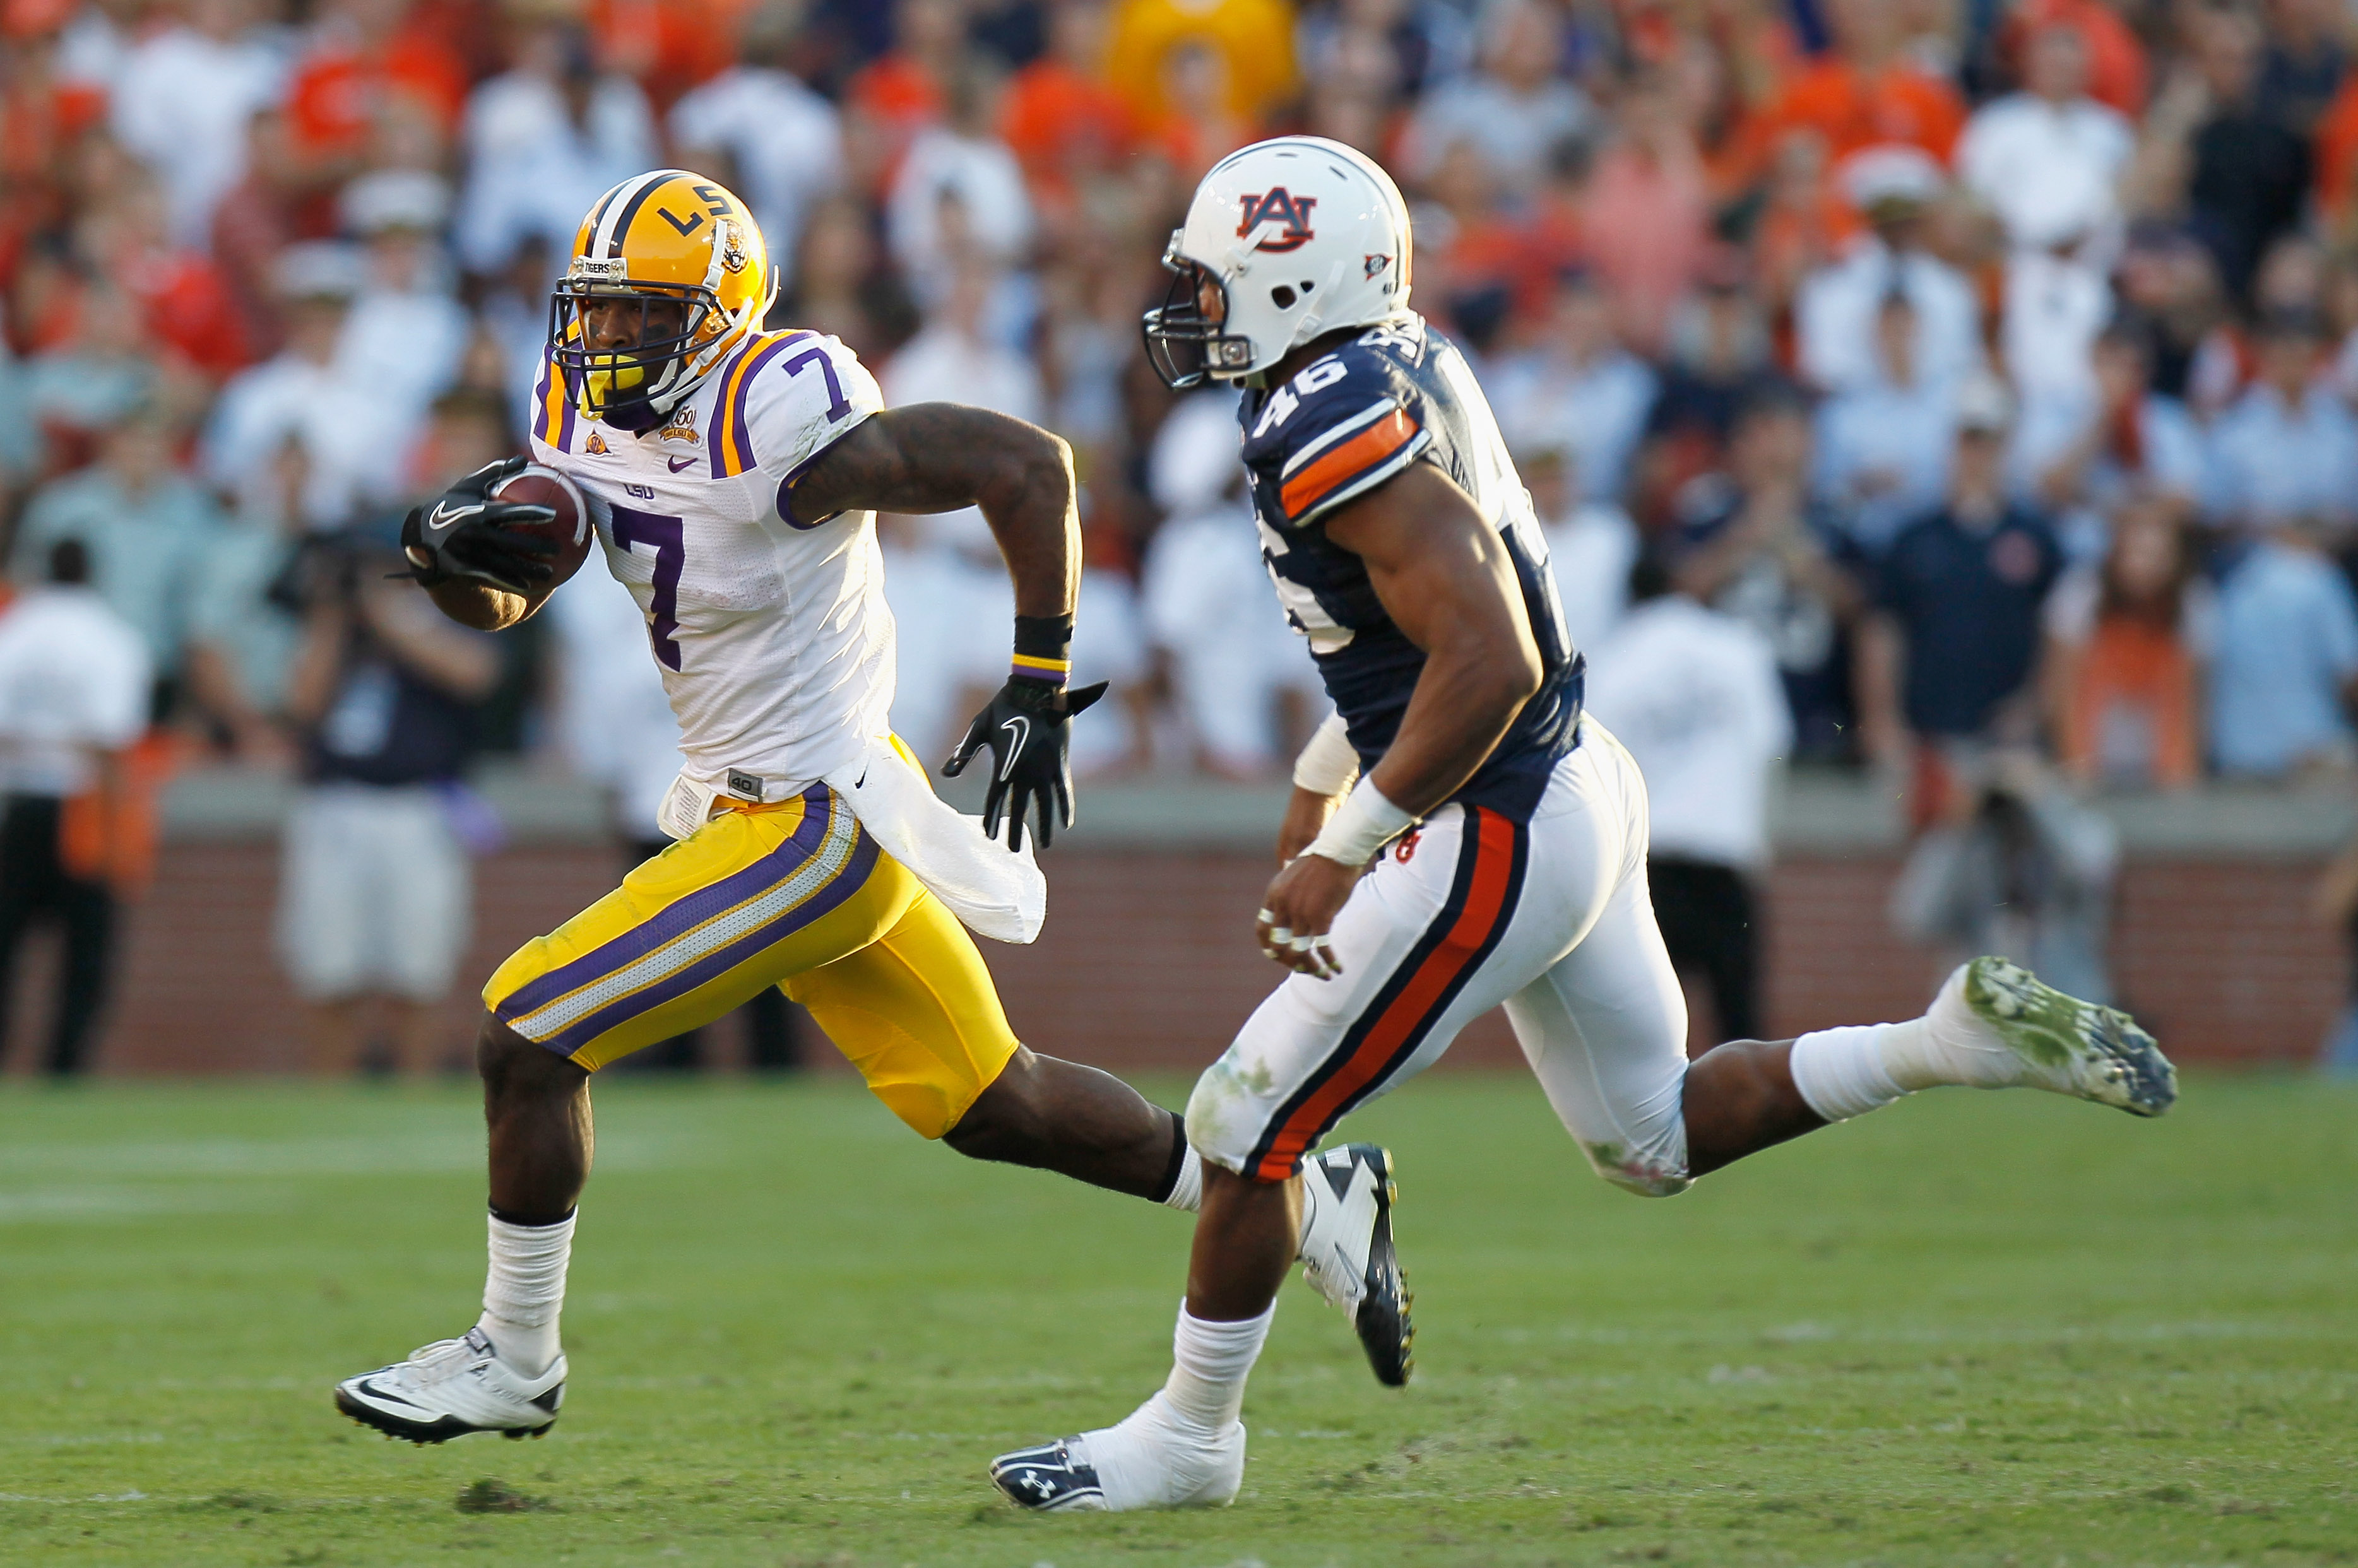 AUBURN, AL - OCTOBER 23:  Patrick Peterson #7 of the LSU Tigers against Craig Stevens #46 of the Auburn Tigers at Jordan-Hare Stadium on October 23, 2010 in Auburn, Alabama.  (Photo by Kevin C. Cox/Getty Images)